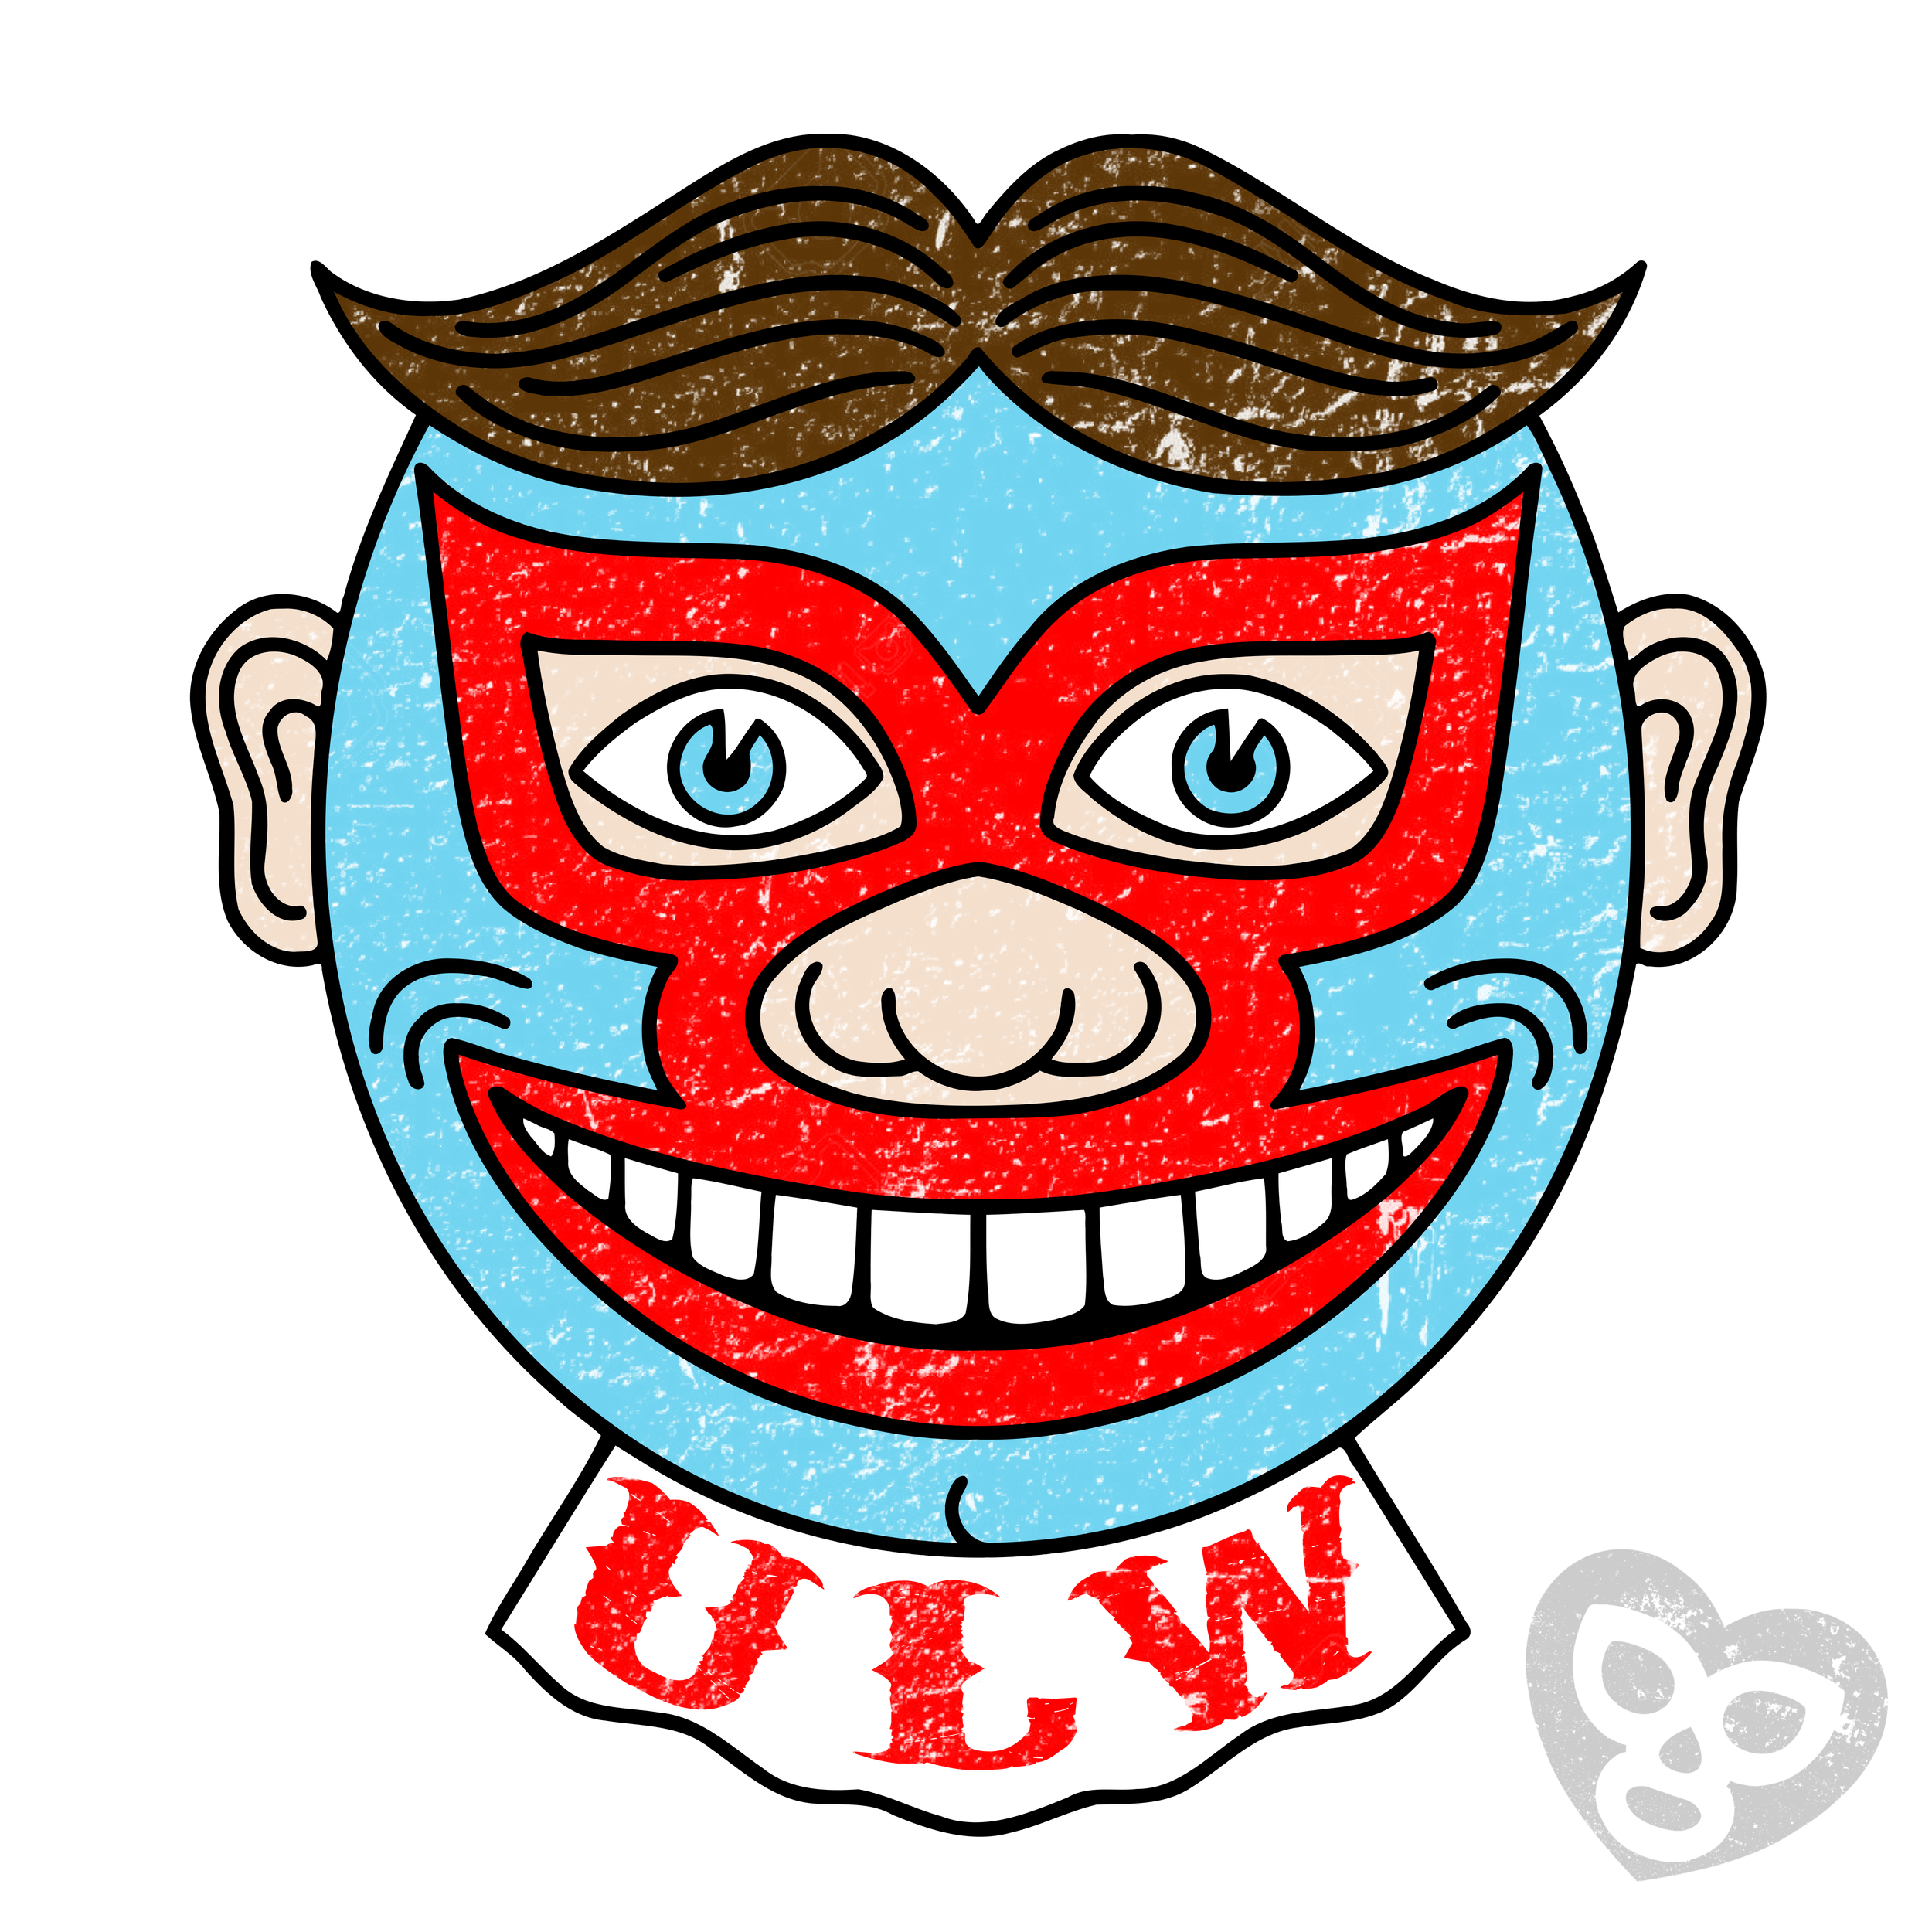 ULW_face_watermark.png